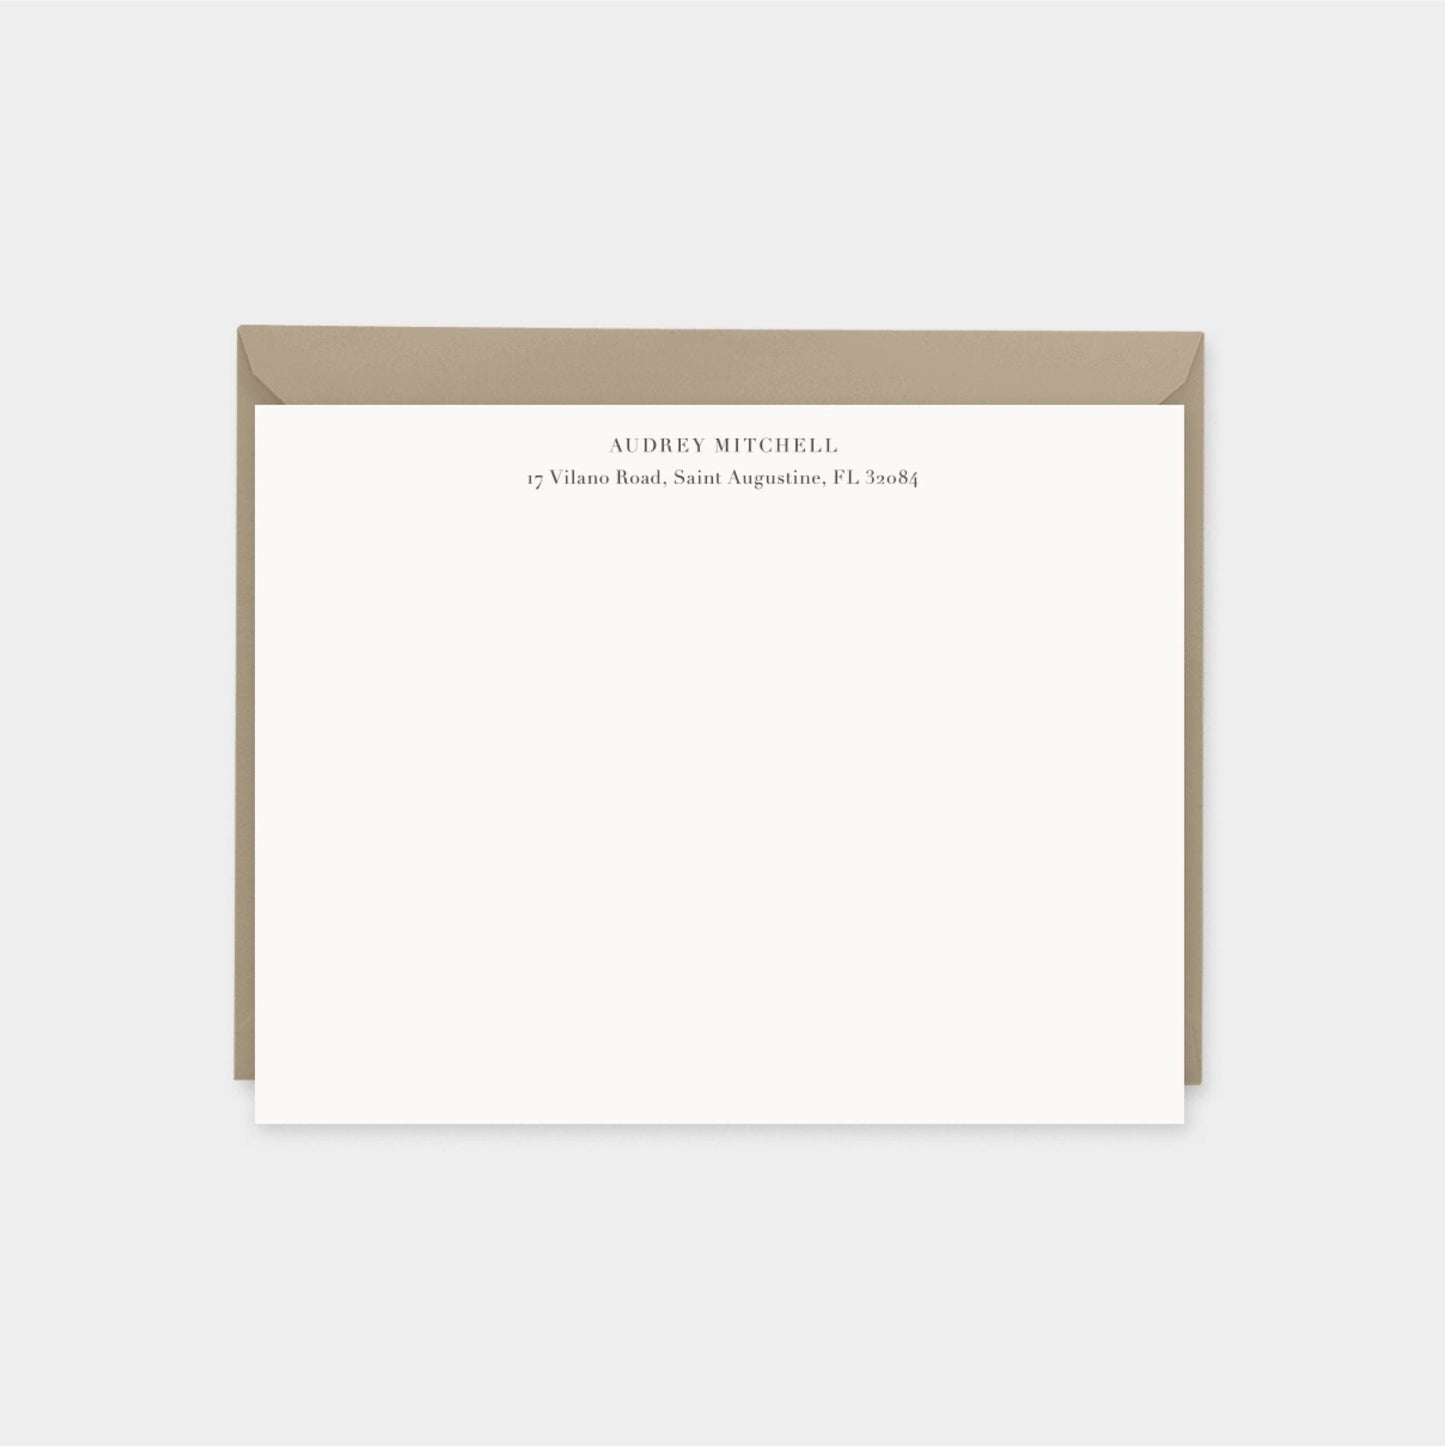 Mustard Yellow Speckled Texture Note-Greeting & Note Cards-The Design Craft